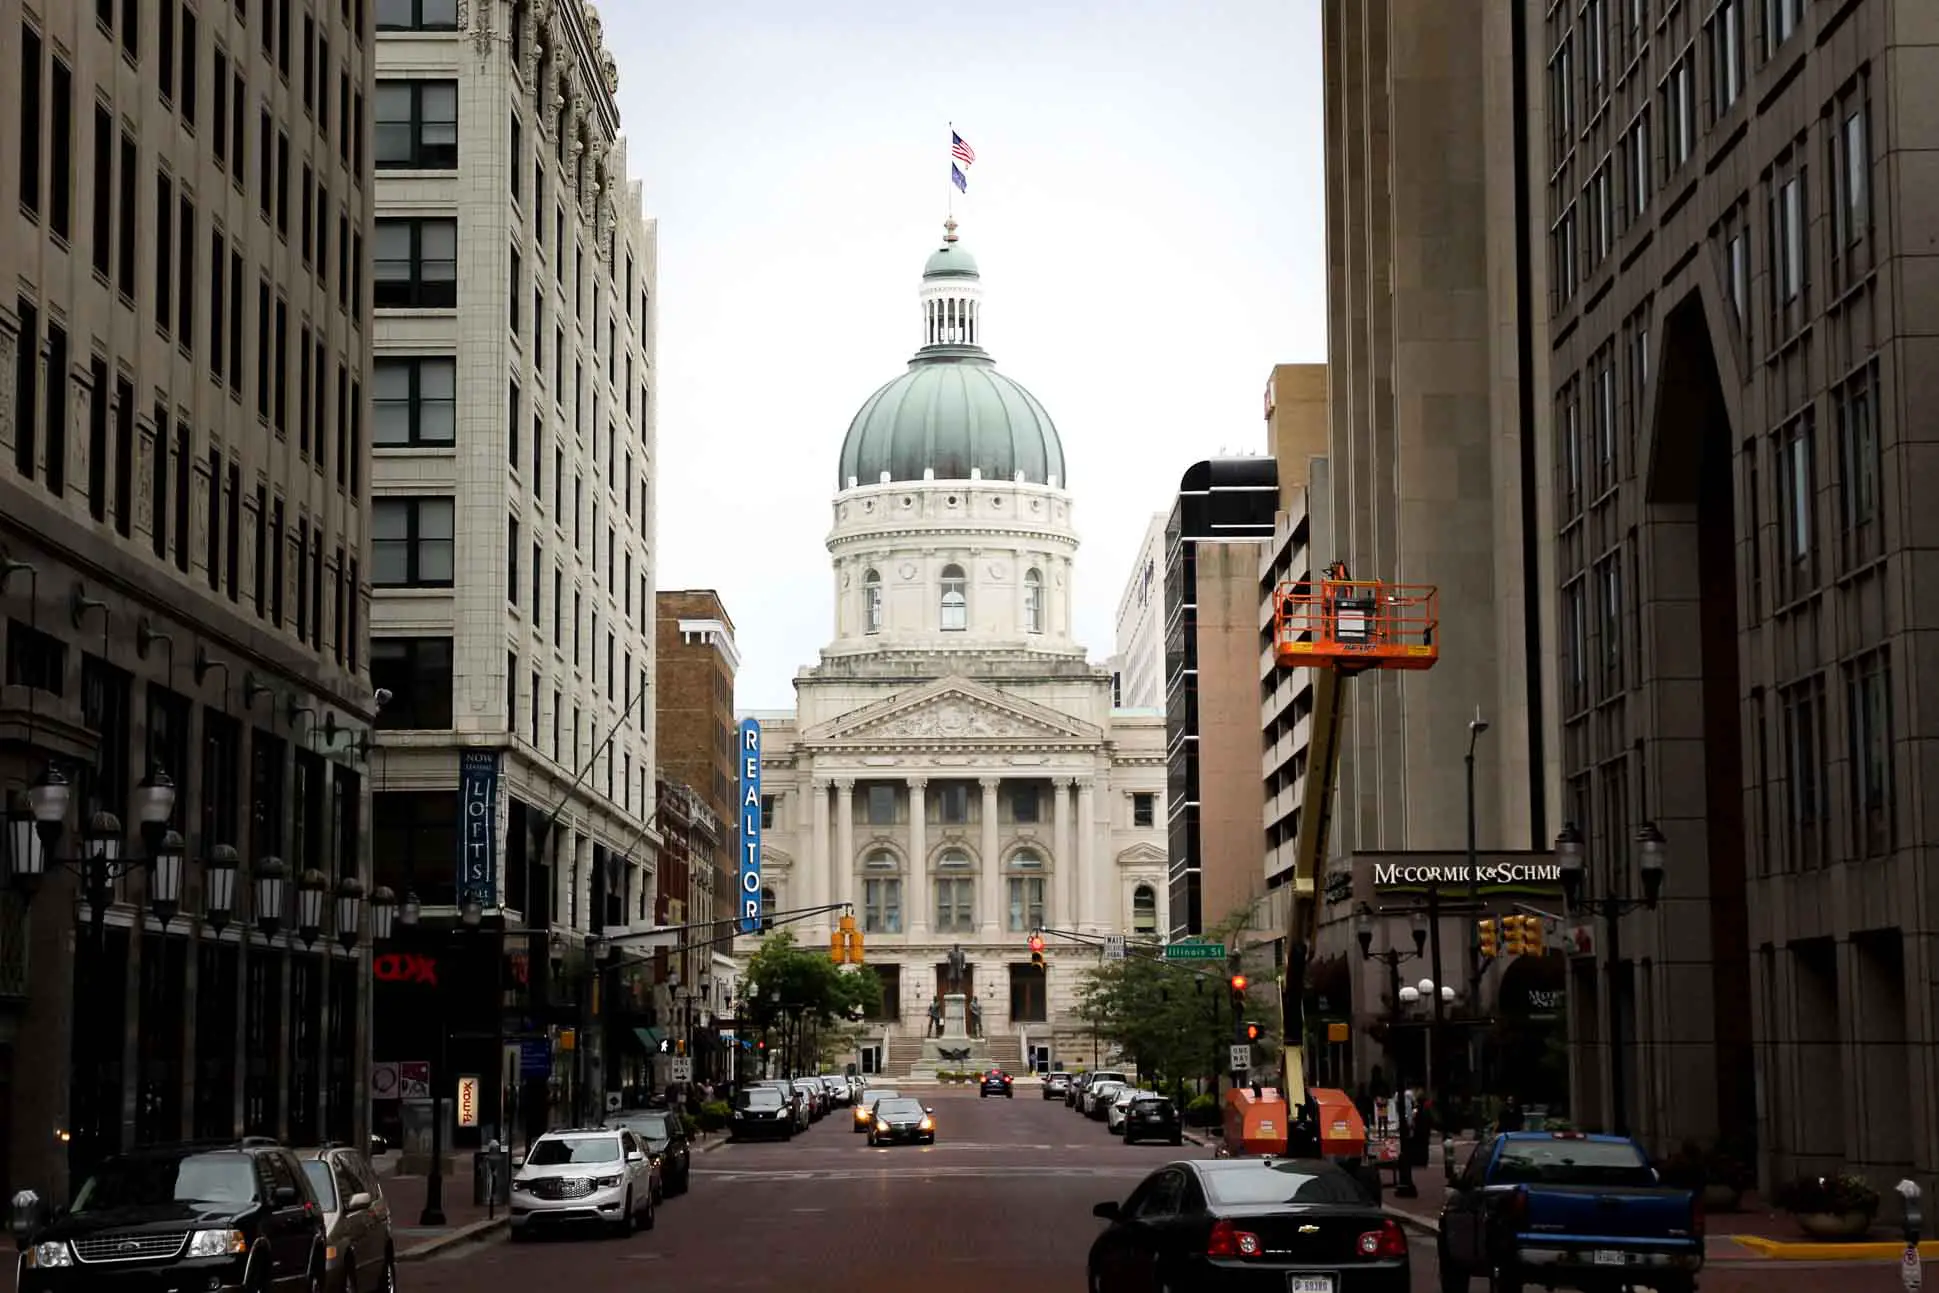 Indiana State Capitol viewed down city street, framed by buildings